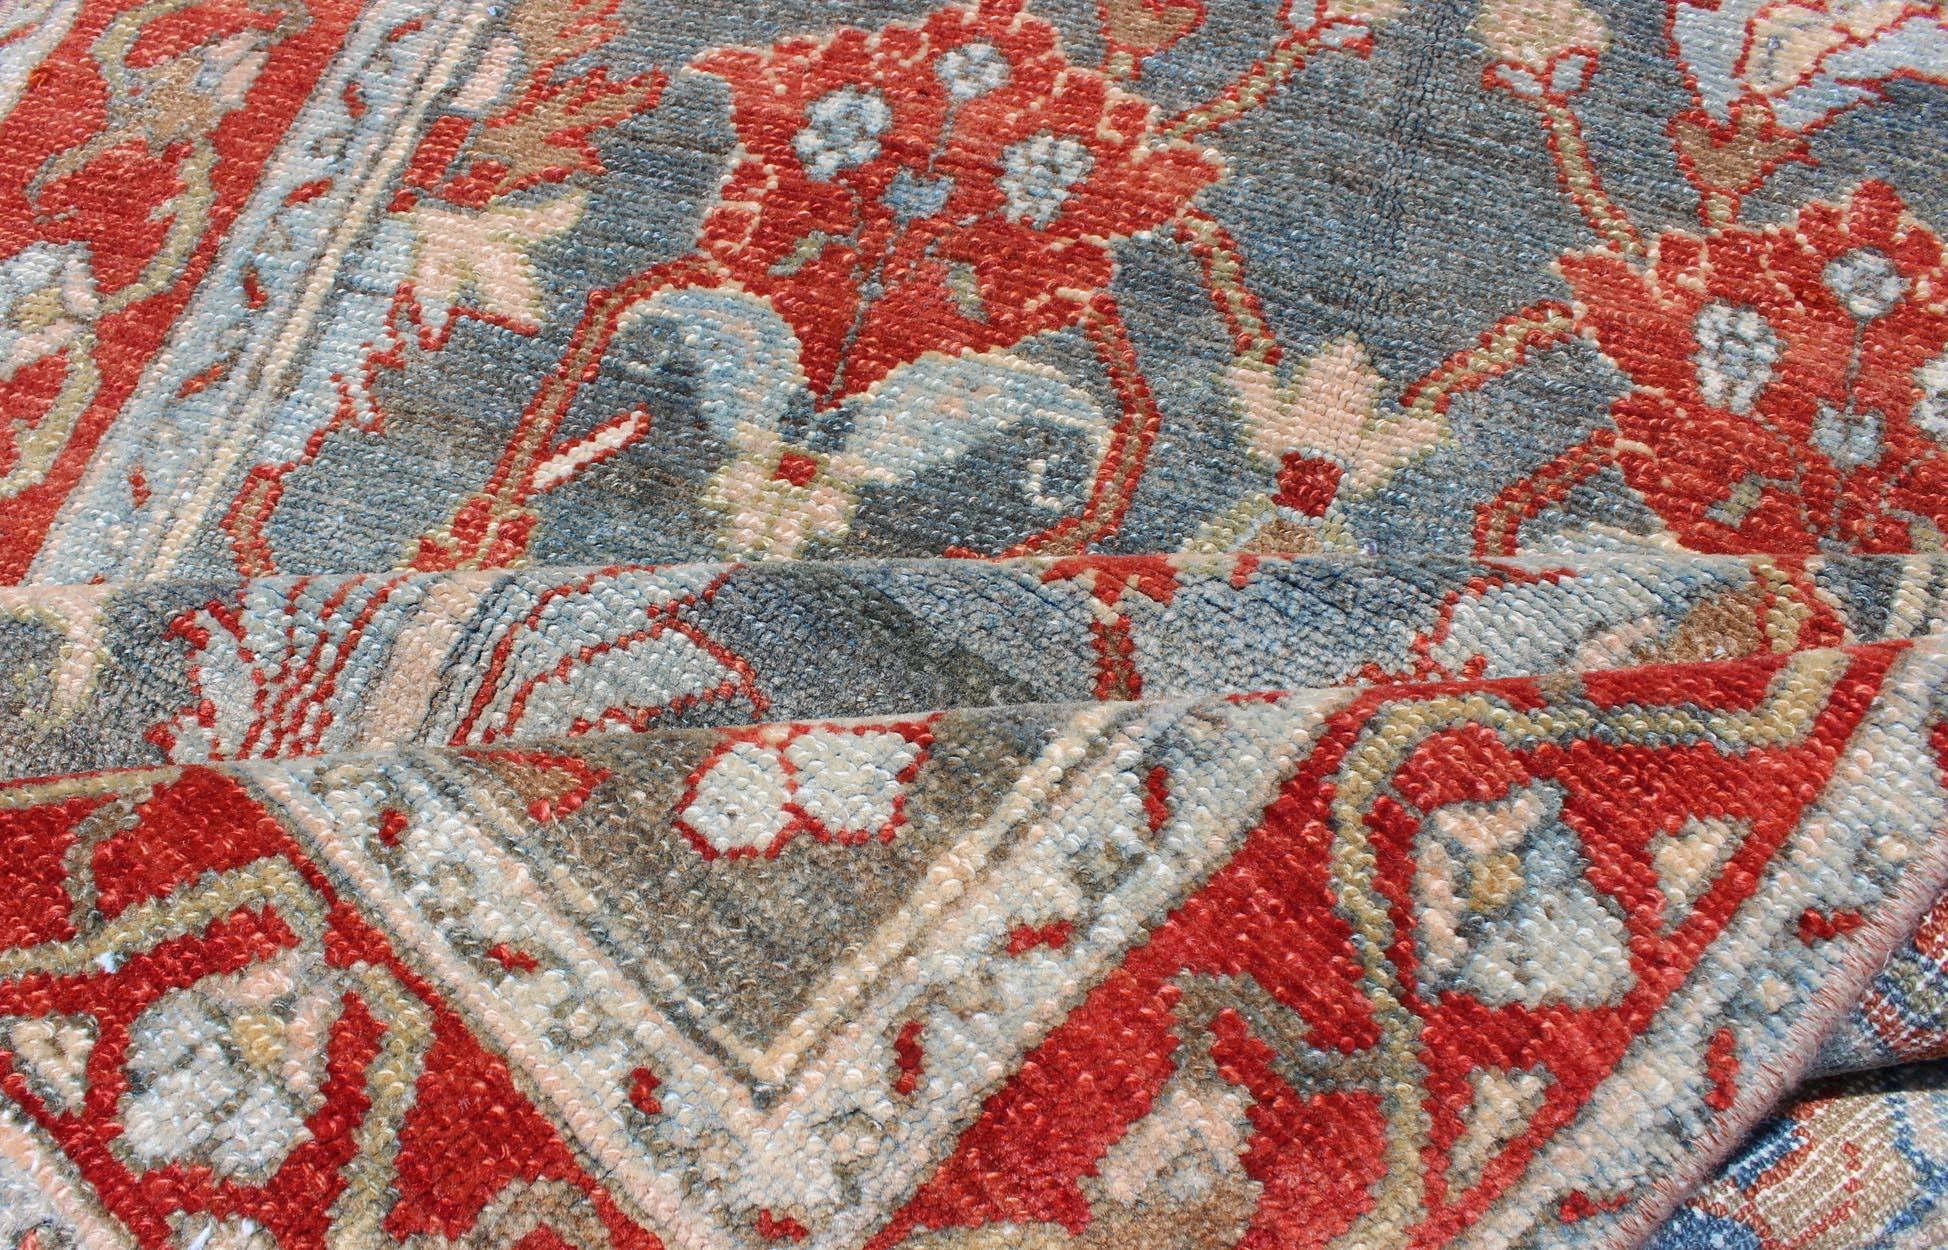 Red and Blue Antique Persian Hamedan Runner with All-Over Geometric Design In Good Condition For Sale In Atlanta, GA